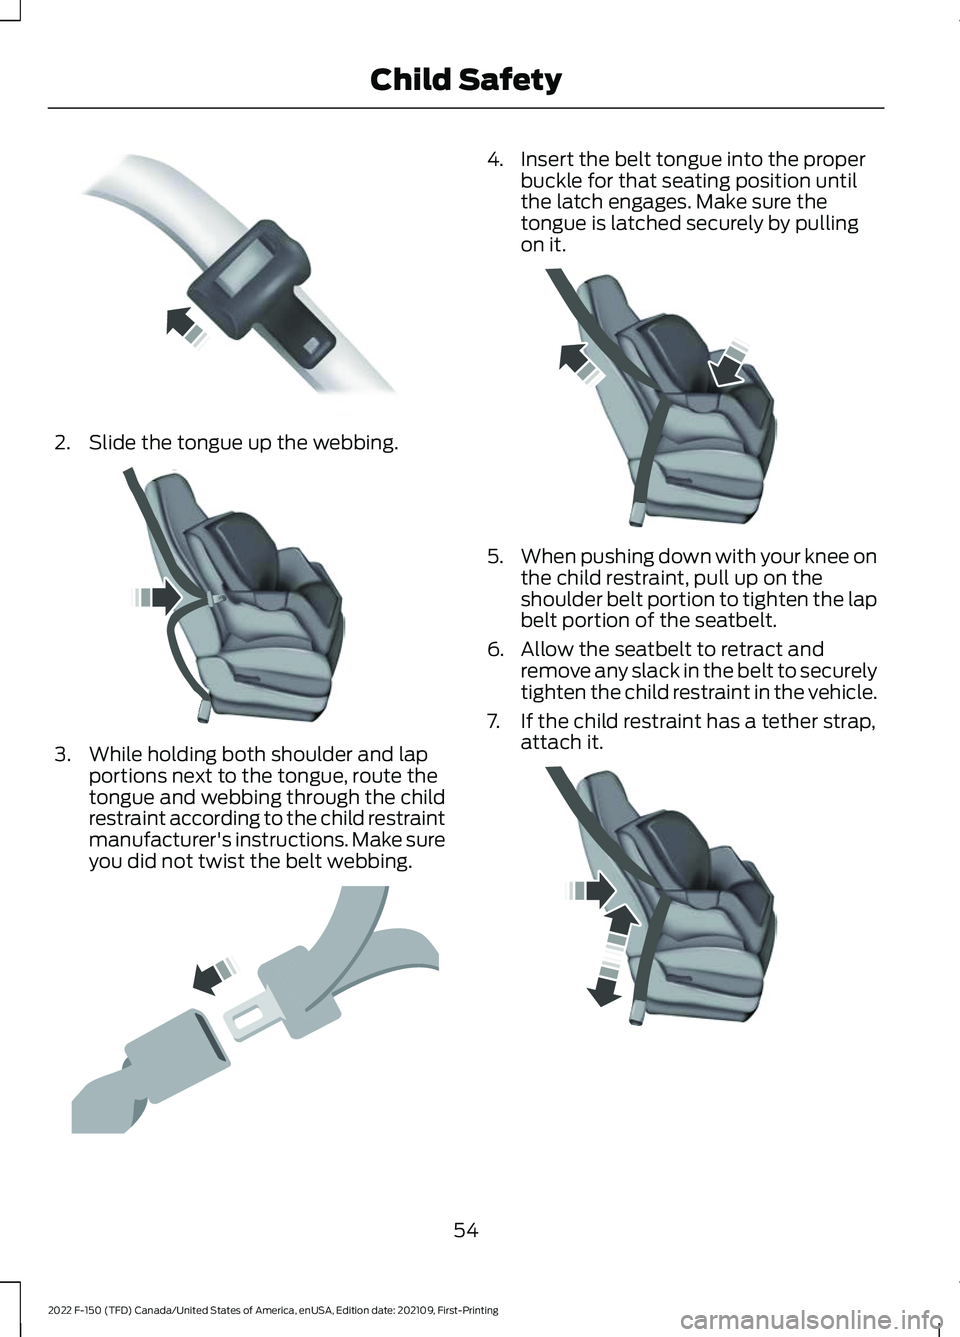 FORD F-150 2022 Workshop Manual 2. Slide the tongue up the webbing.
3. While holding both shoulder and lap
portions next to the tongue, route the
tongue and webbing through the child
restraint according to the child restraint
manufa